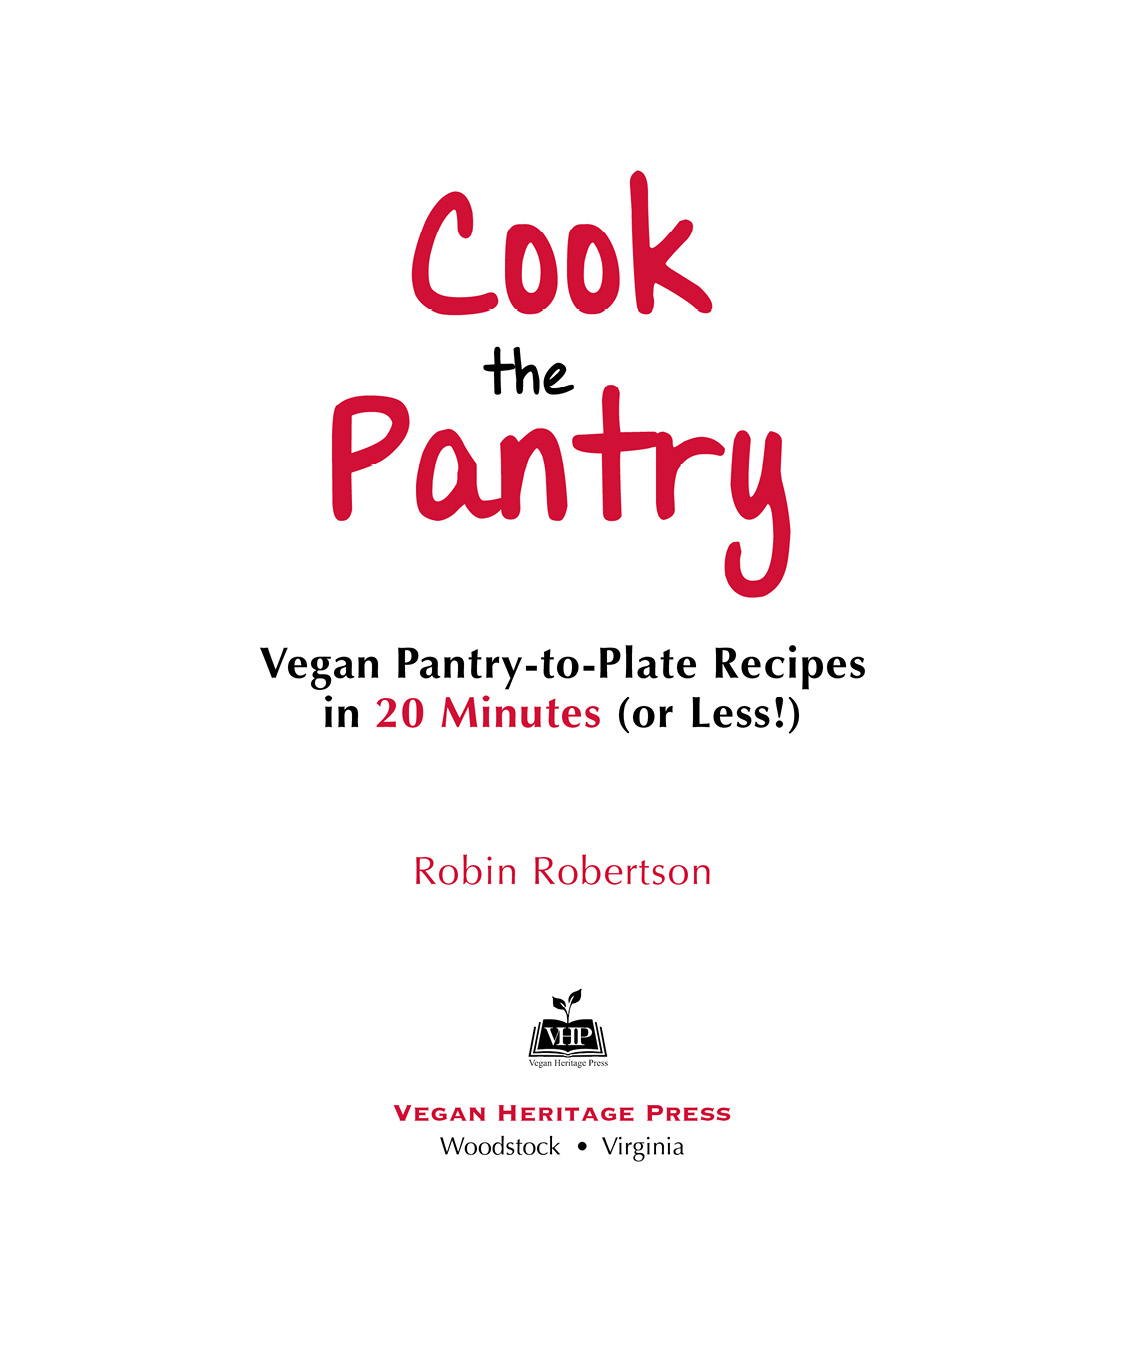 Cook the Pantry Vegan Pantry-to-Plate Recipes in 20 Minutes or Less by Robin - photo 2